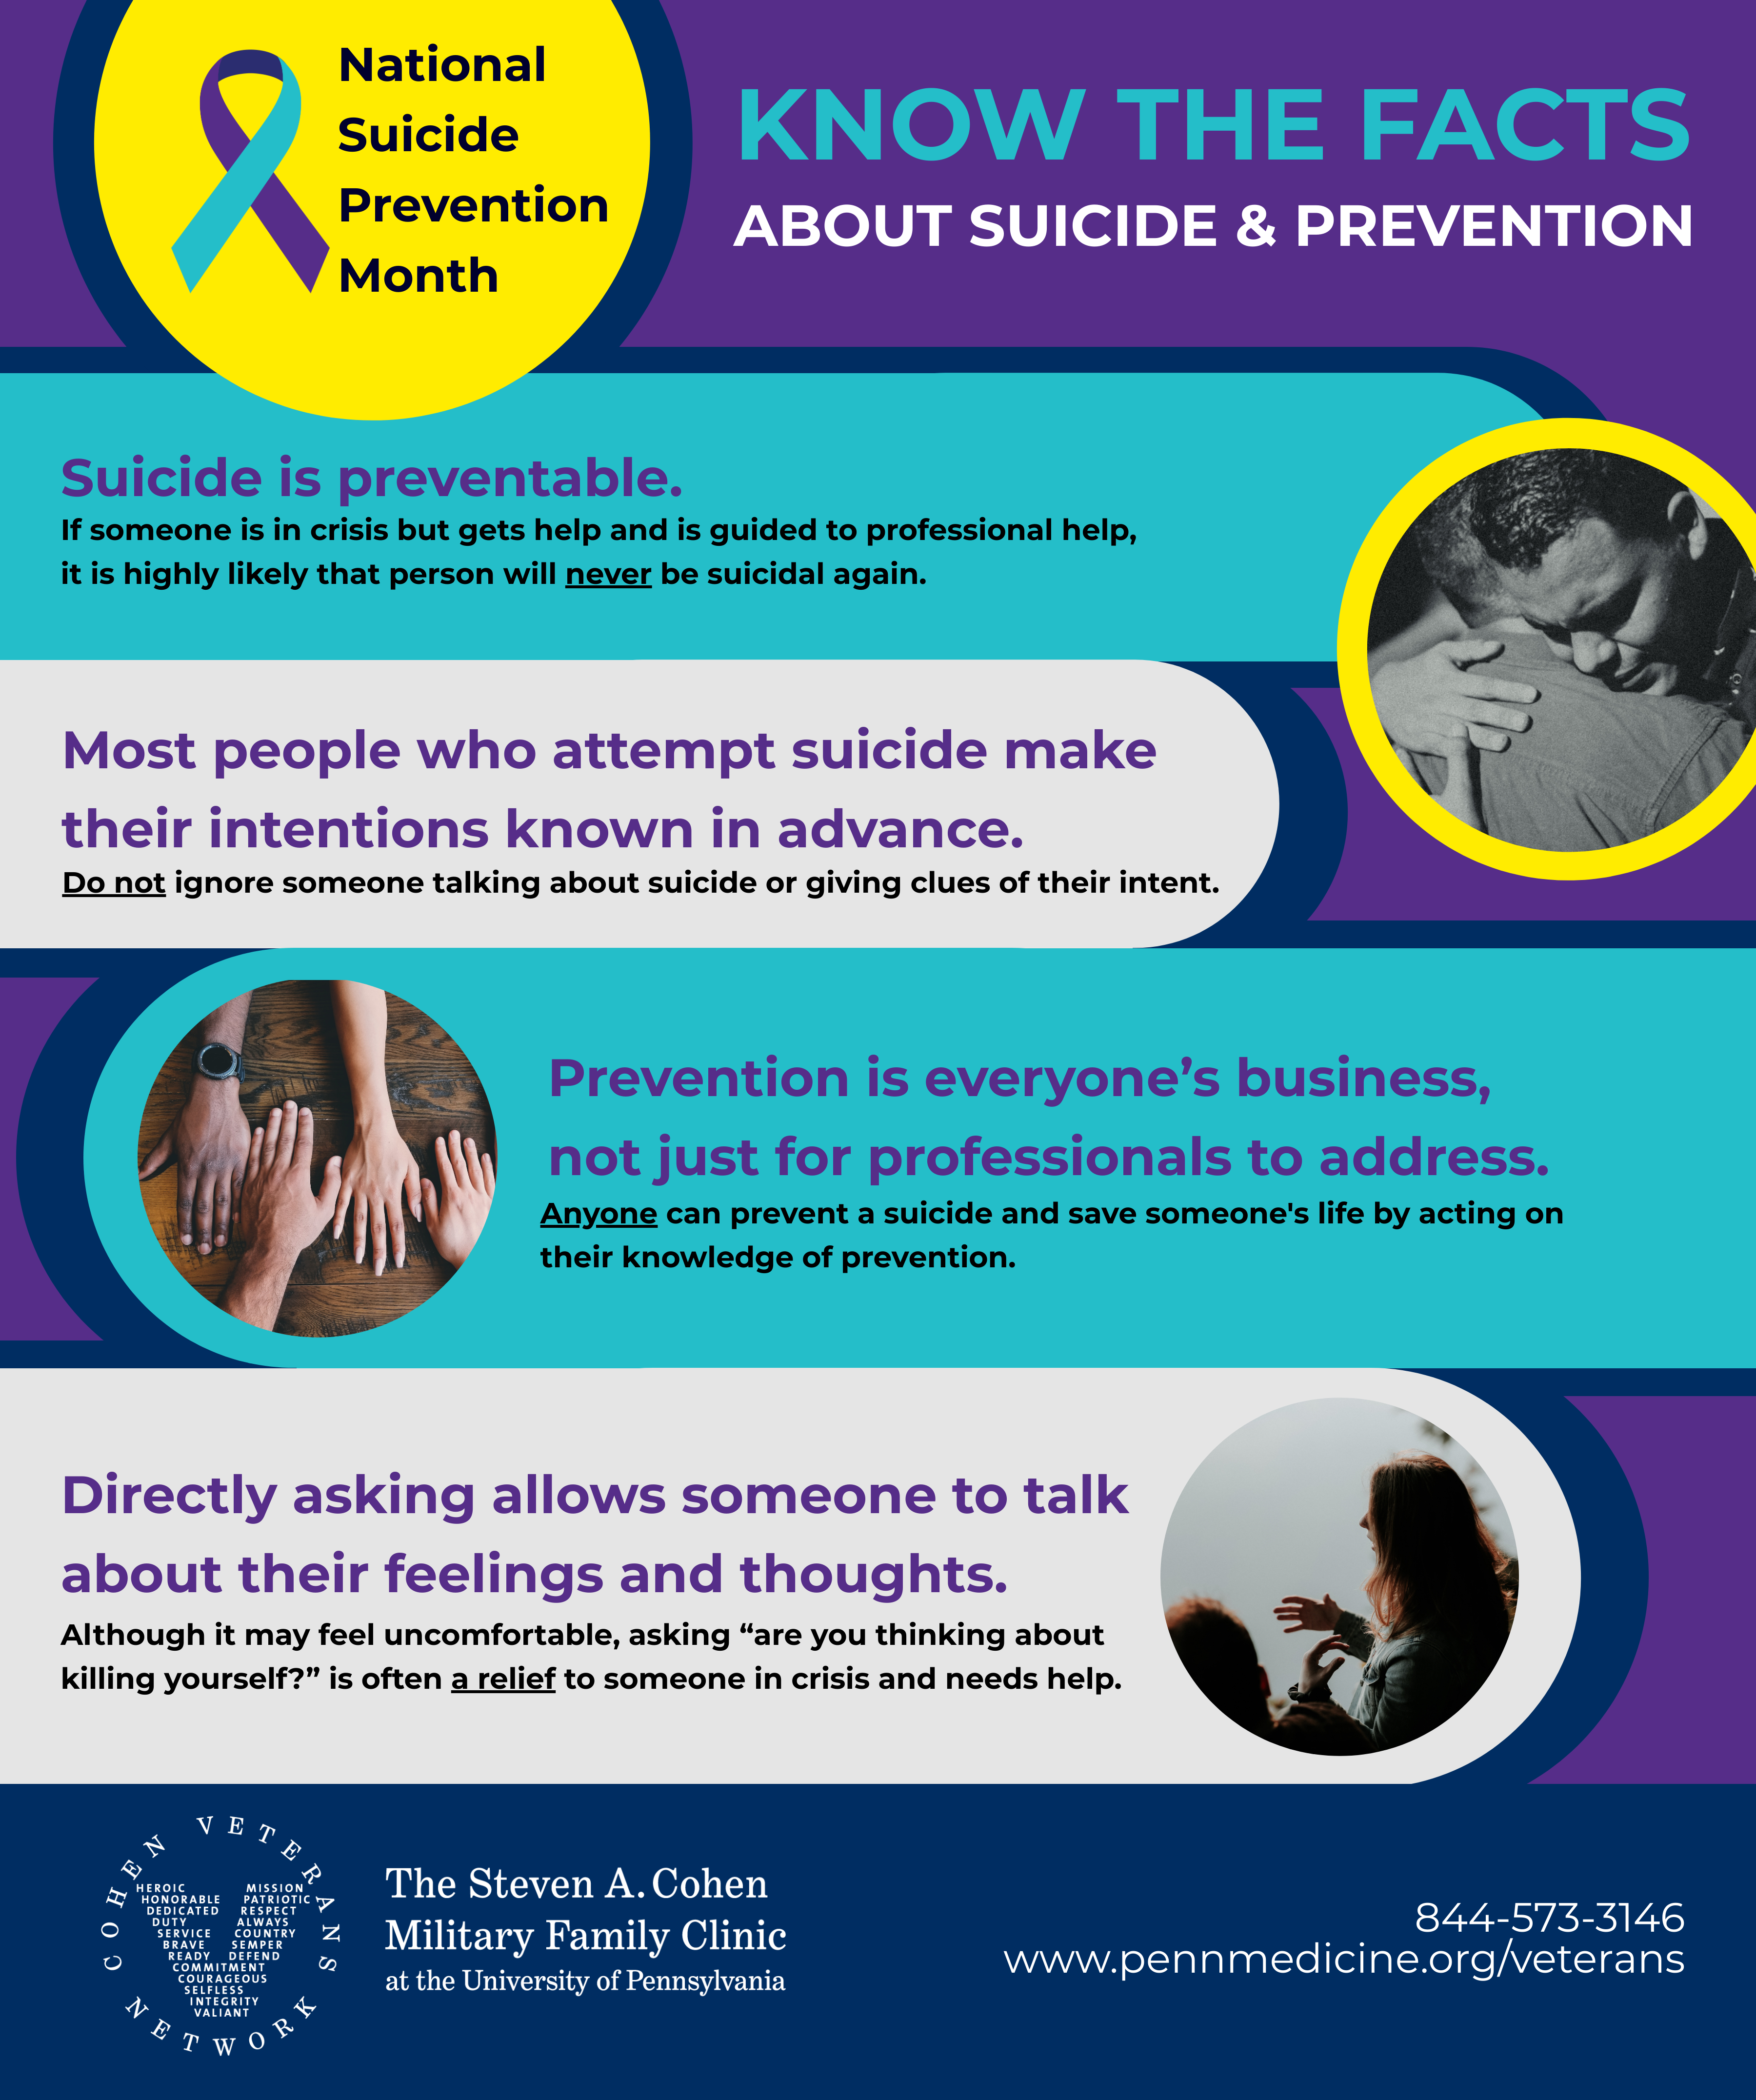 Know the facts about suicide and why prevention works.